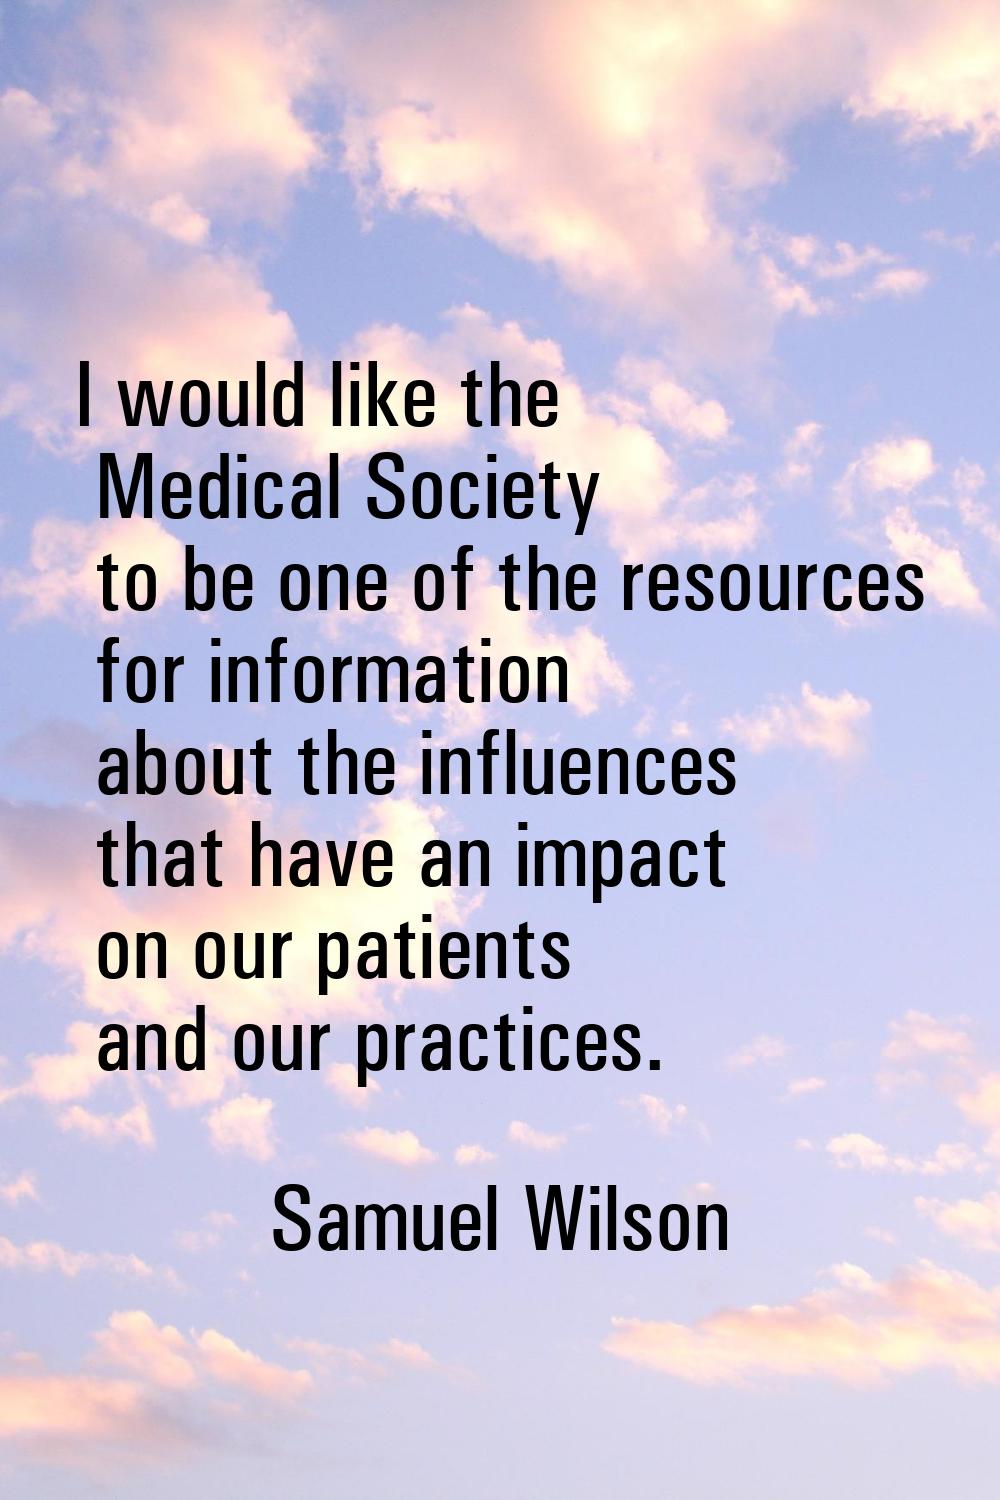 I would like the Medical Society to be one of the resources for information about the influences th